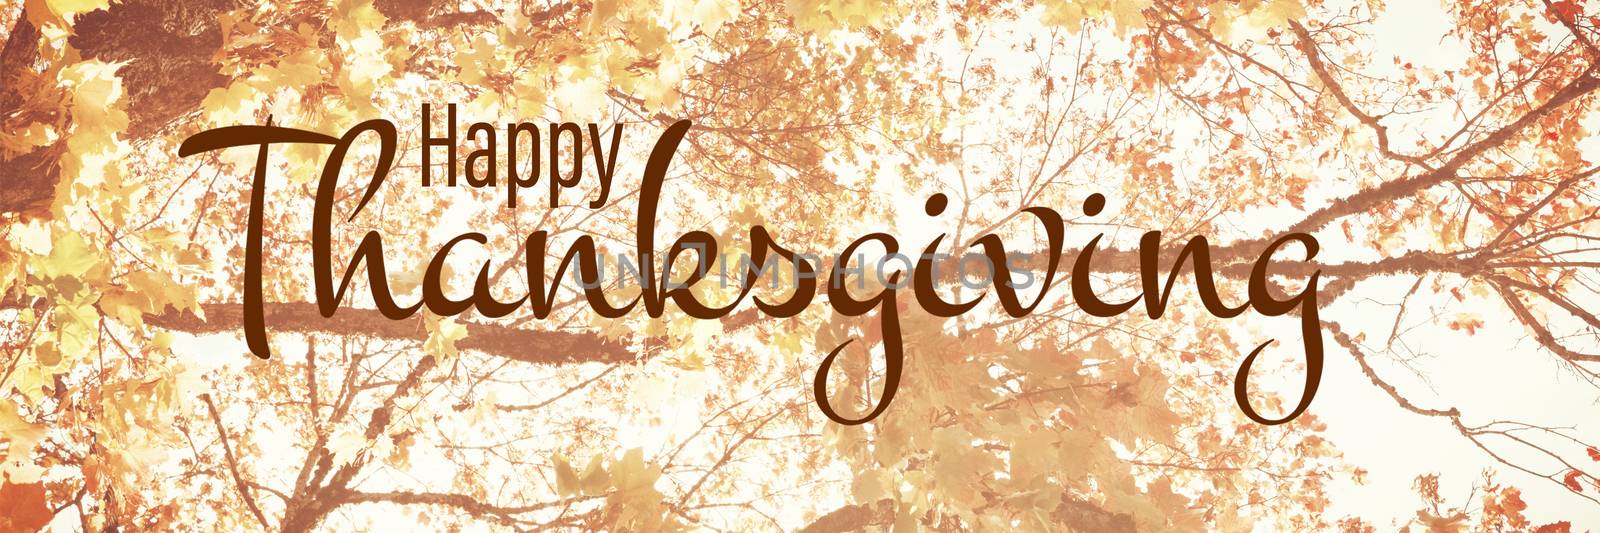 Illustration of happy thanksgiving day text greeting against  low angle view of tree against blue sky